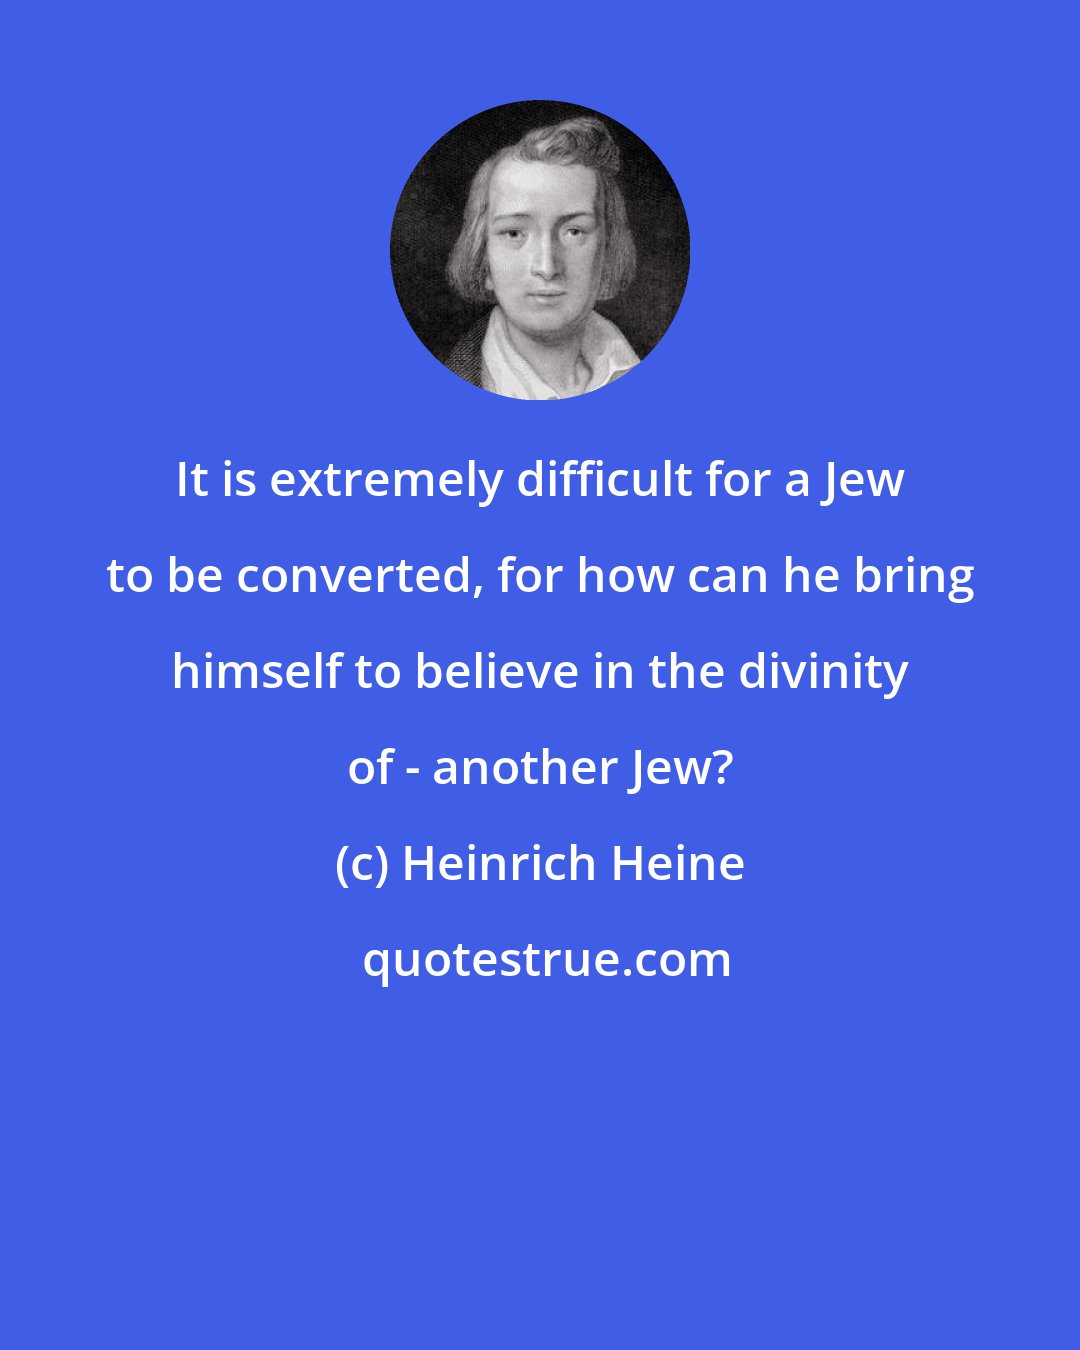 Heinrich Heine: It is extremely difficult for a Jew to be converted, for how can he bring himself to believe in the divinity of - another Jew?